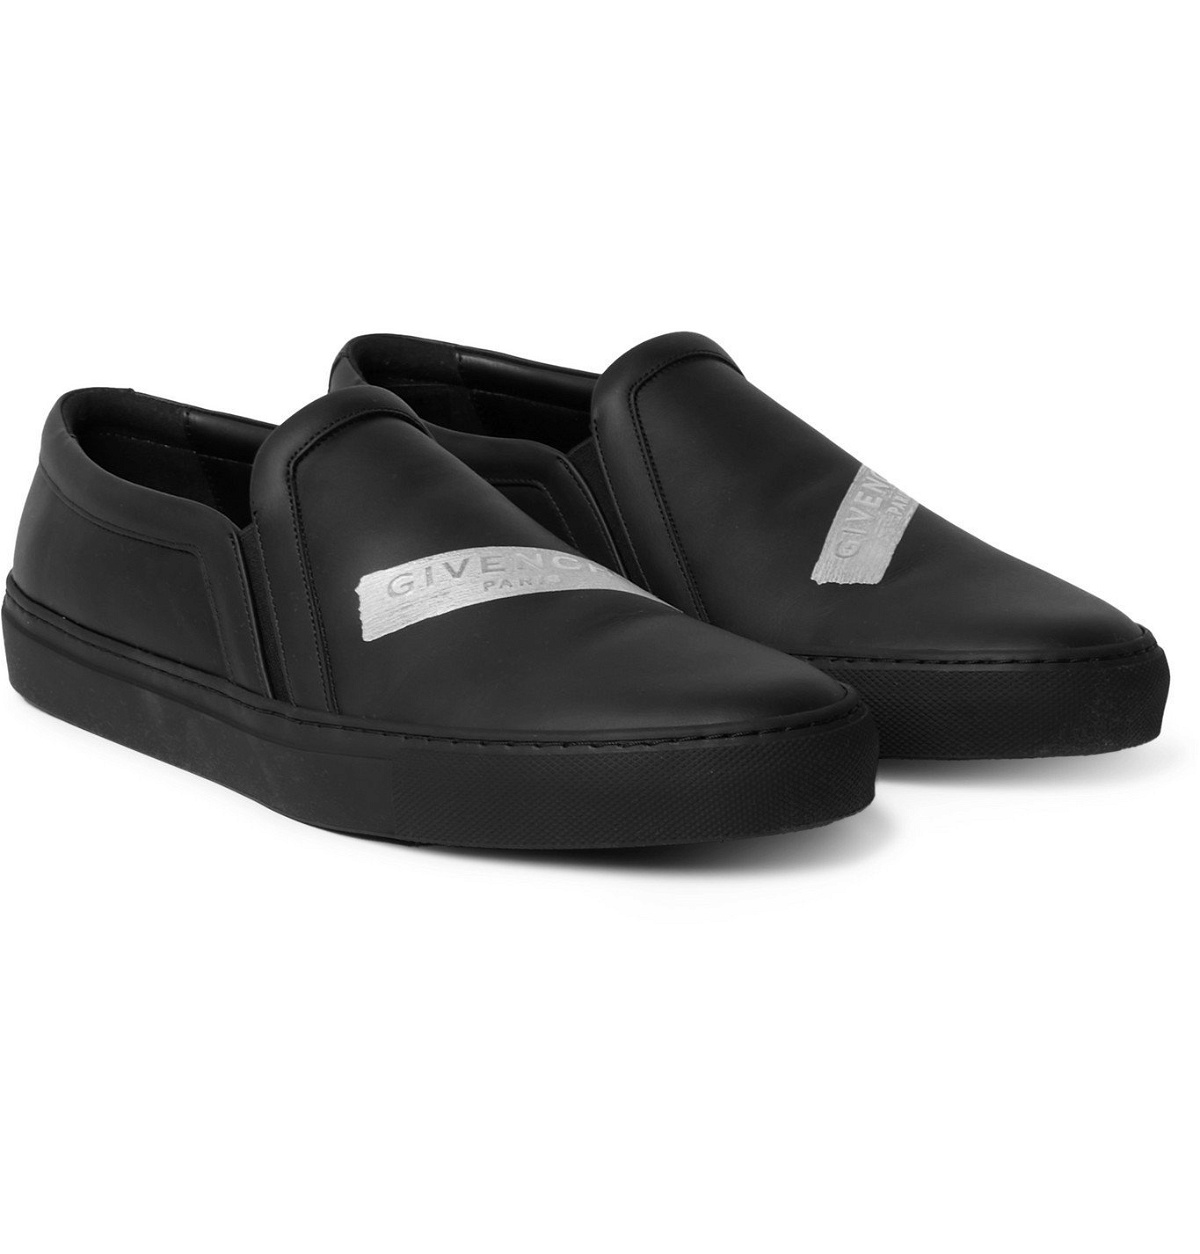 GIVENCHY - Urban Street Logo-Detailed Leather Sneakers - Black Givenchy